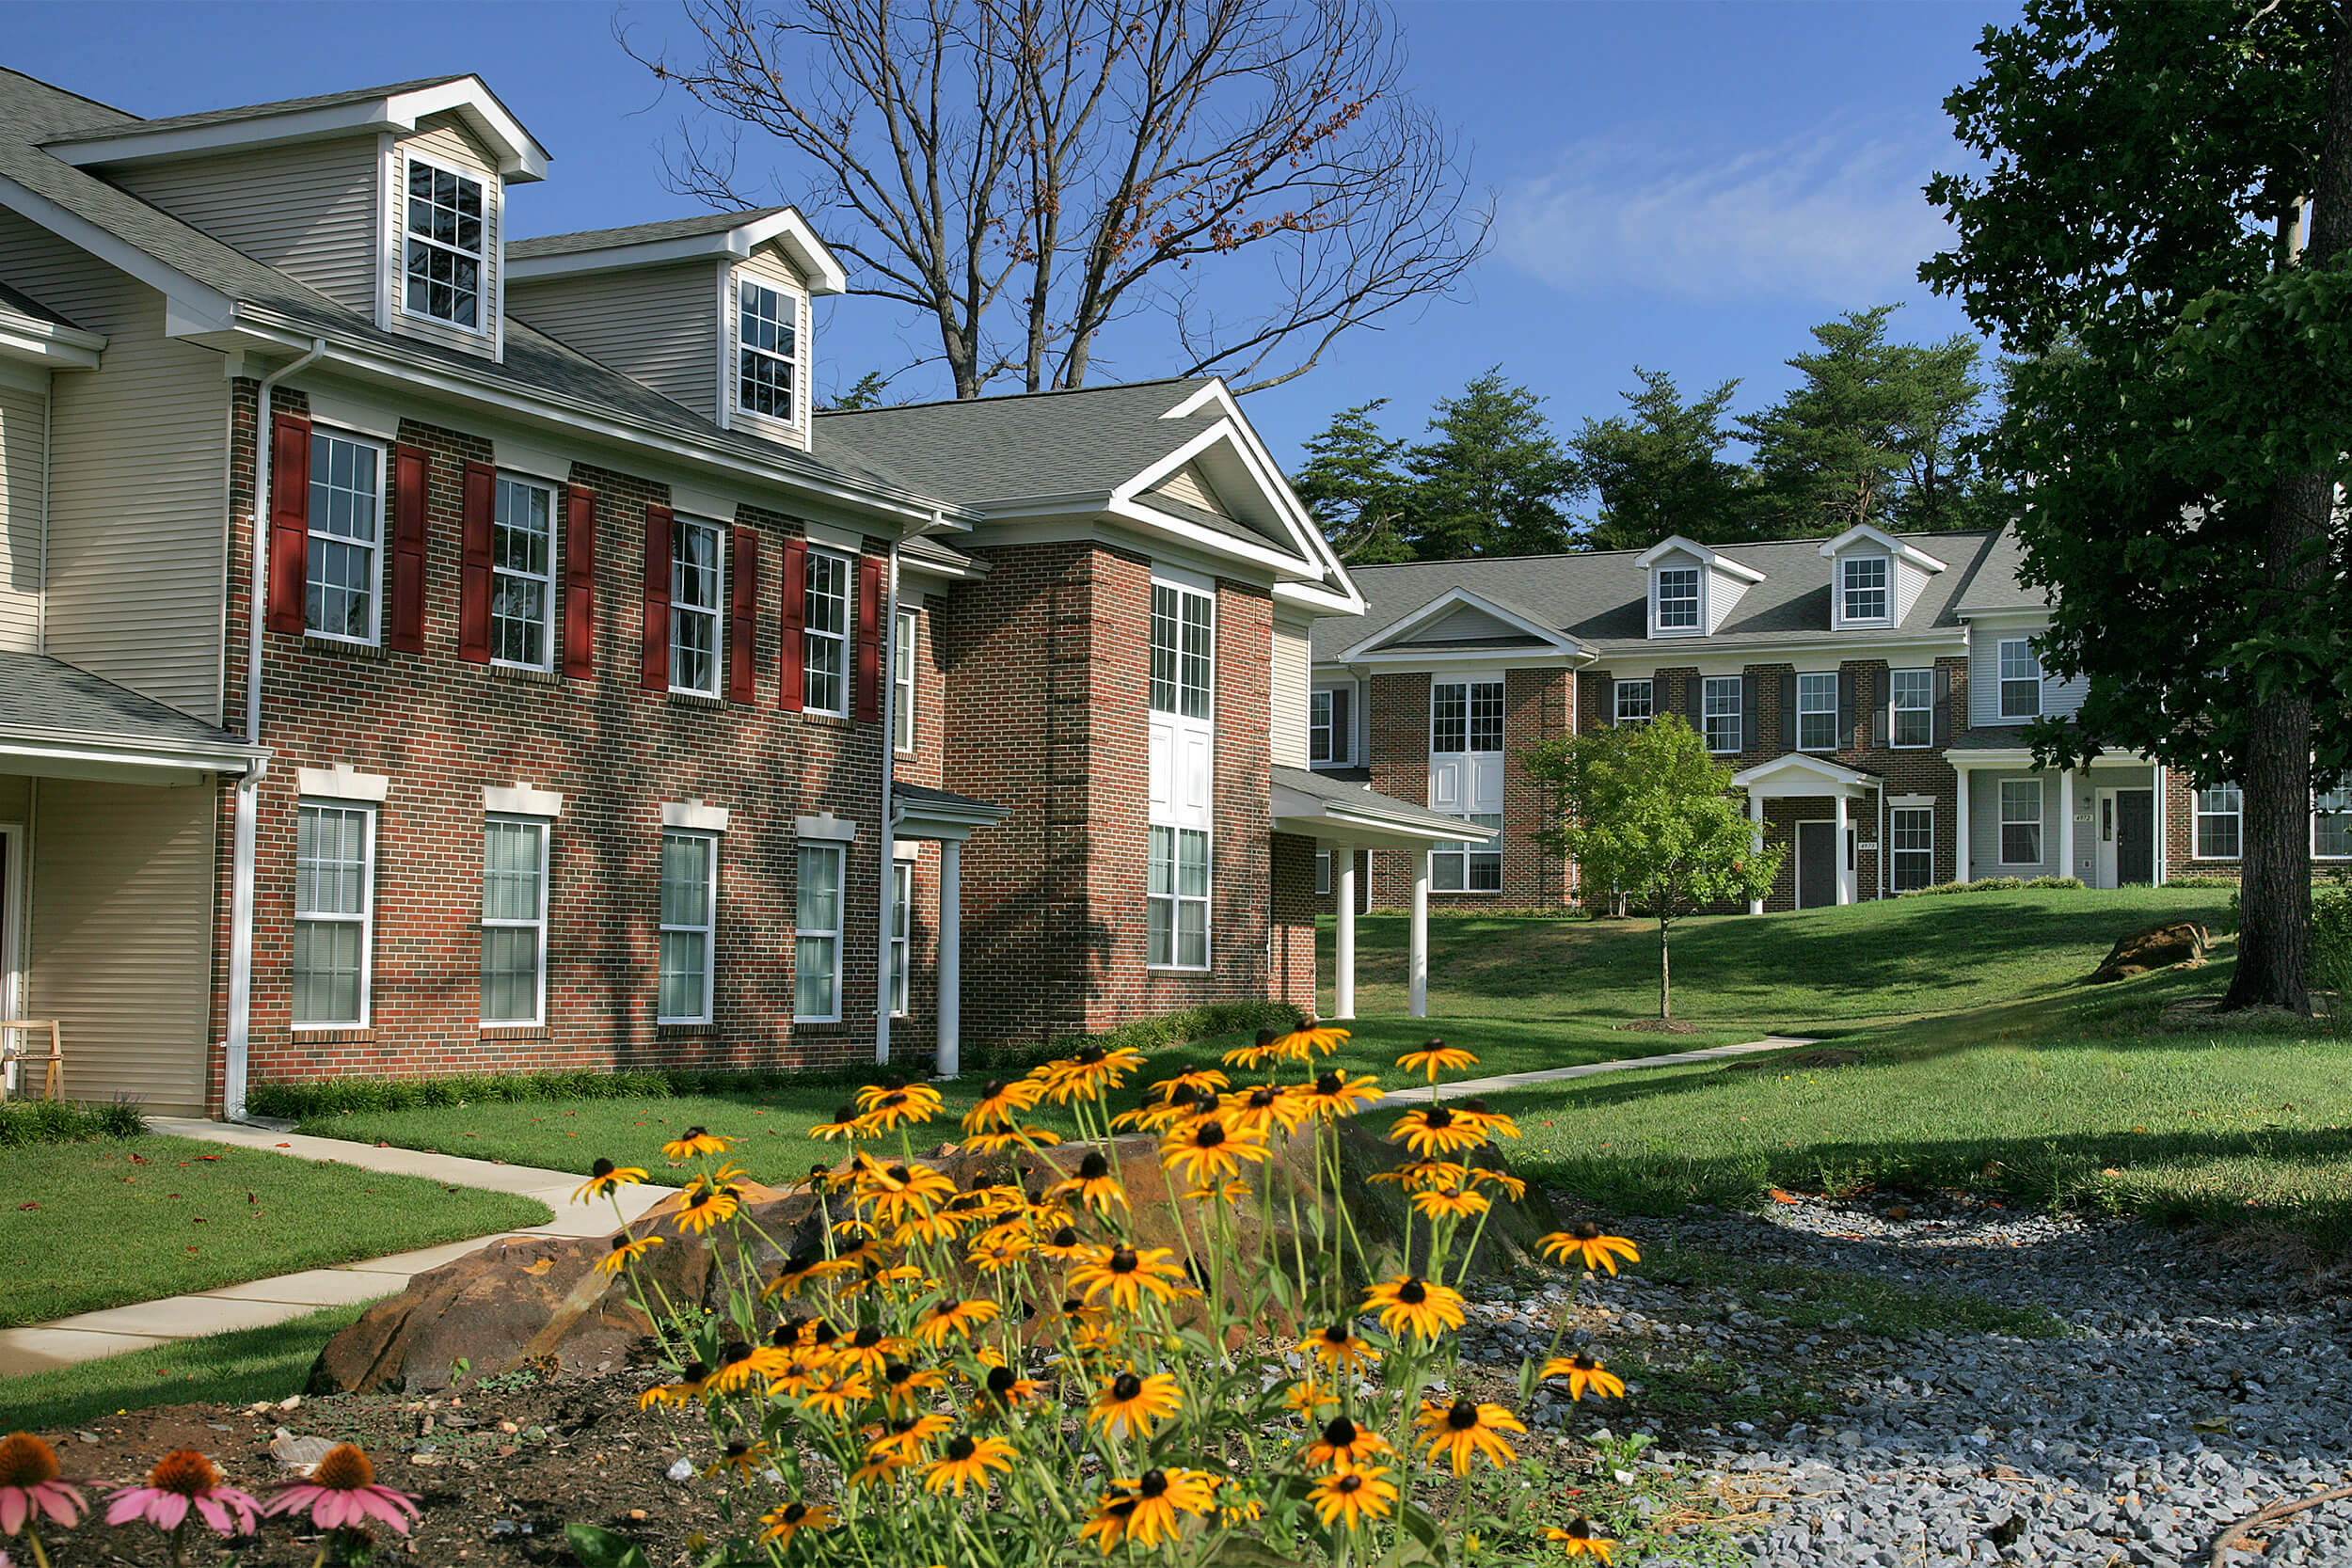 Exterior daytime view of multi-family housing units. The facade of the buildings are brick with neutral siding and stone accents, and yellow flowers are seen in the foreground.